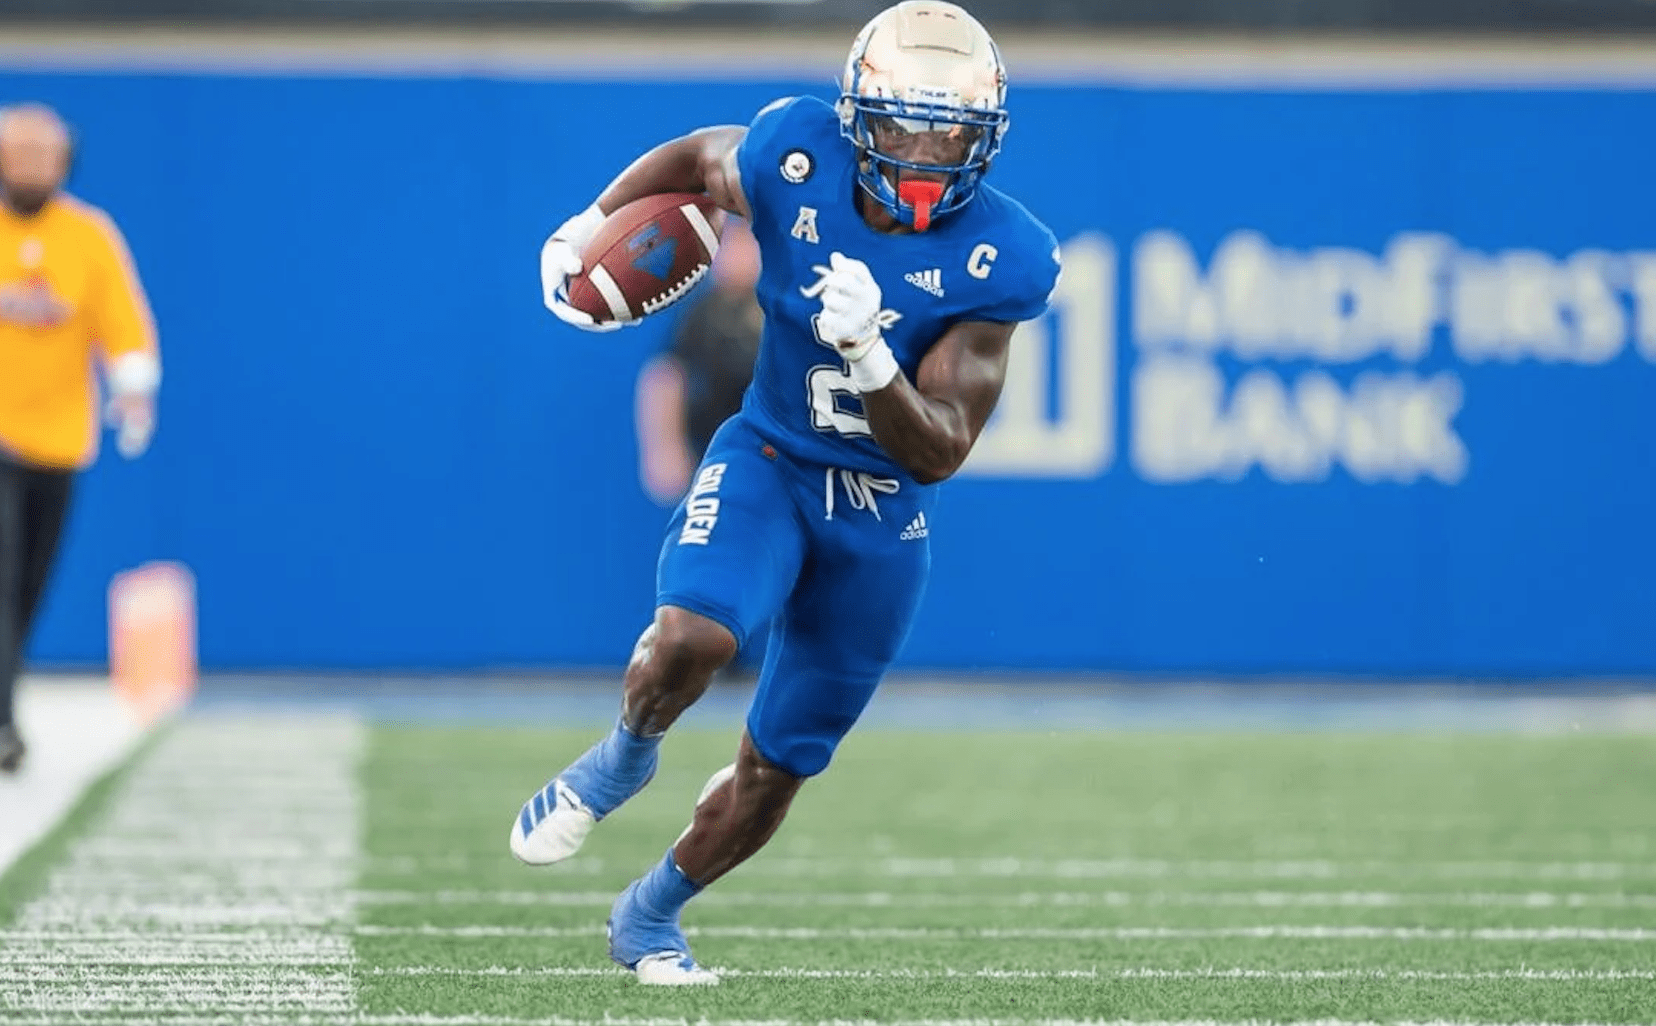 Keylon Stokes is an elusive slot receiver for Tulsa with big play capability. Hula Bowl scout Nik Ehler breaks down Stokes as an NFL Prospect in this report.